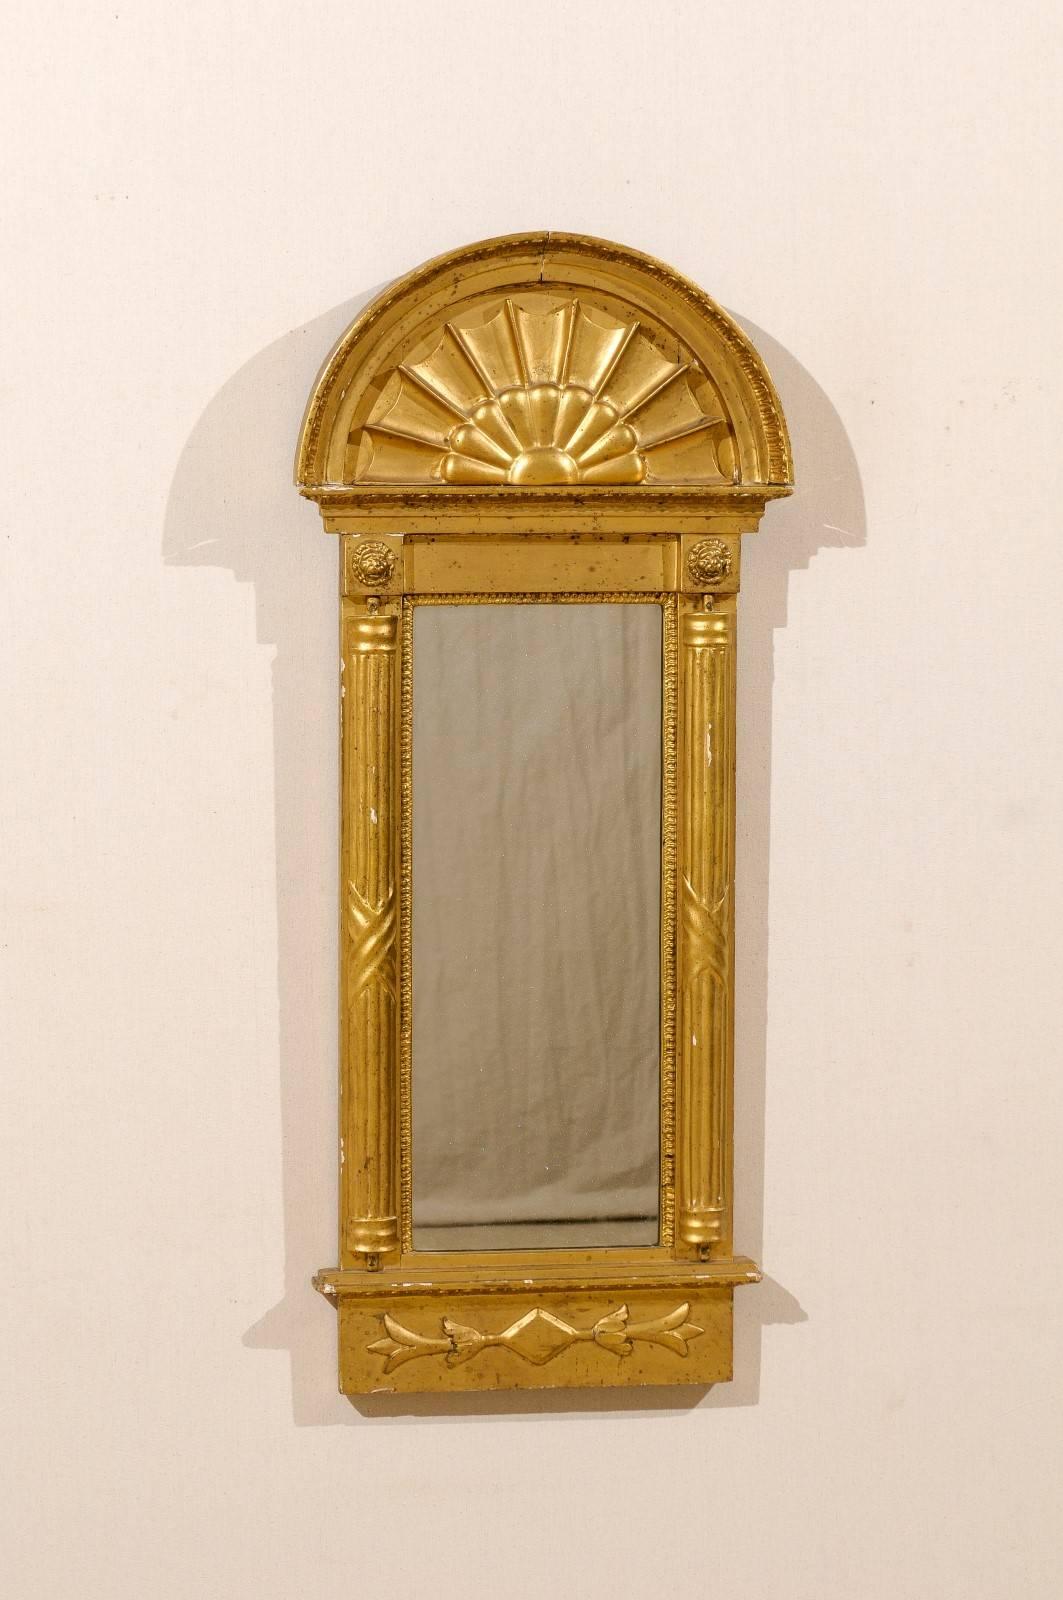 An early 19th century Swedish gilded mirror, circa 1820. This mirror features an arched crest and flanking fluted half columns. There are two lion carvings above each column. Within the arch there is a decoration reminiscent of a flower or a